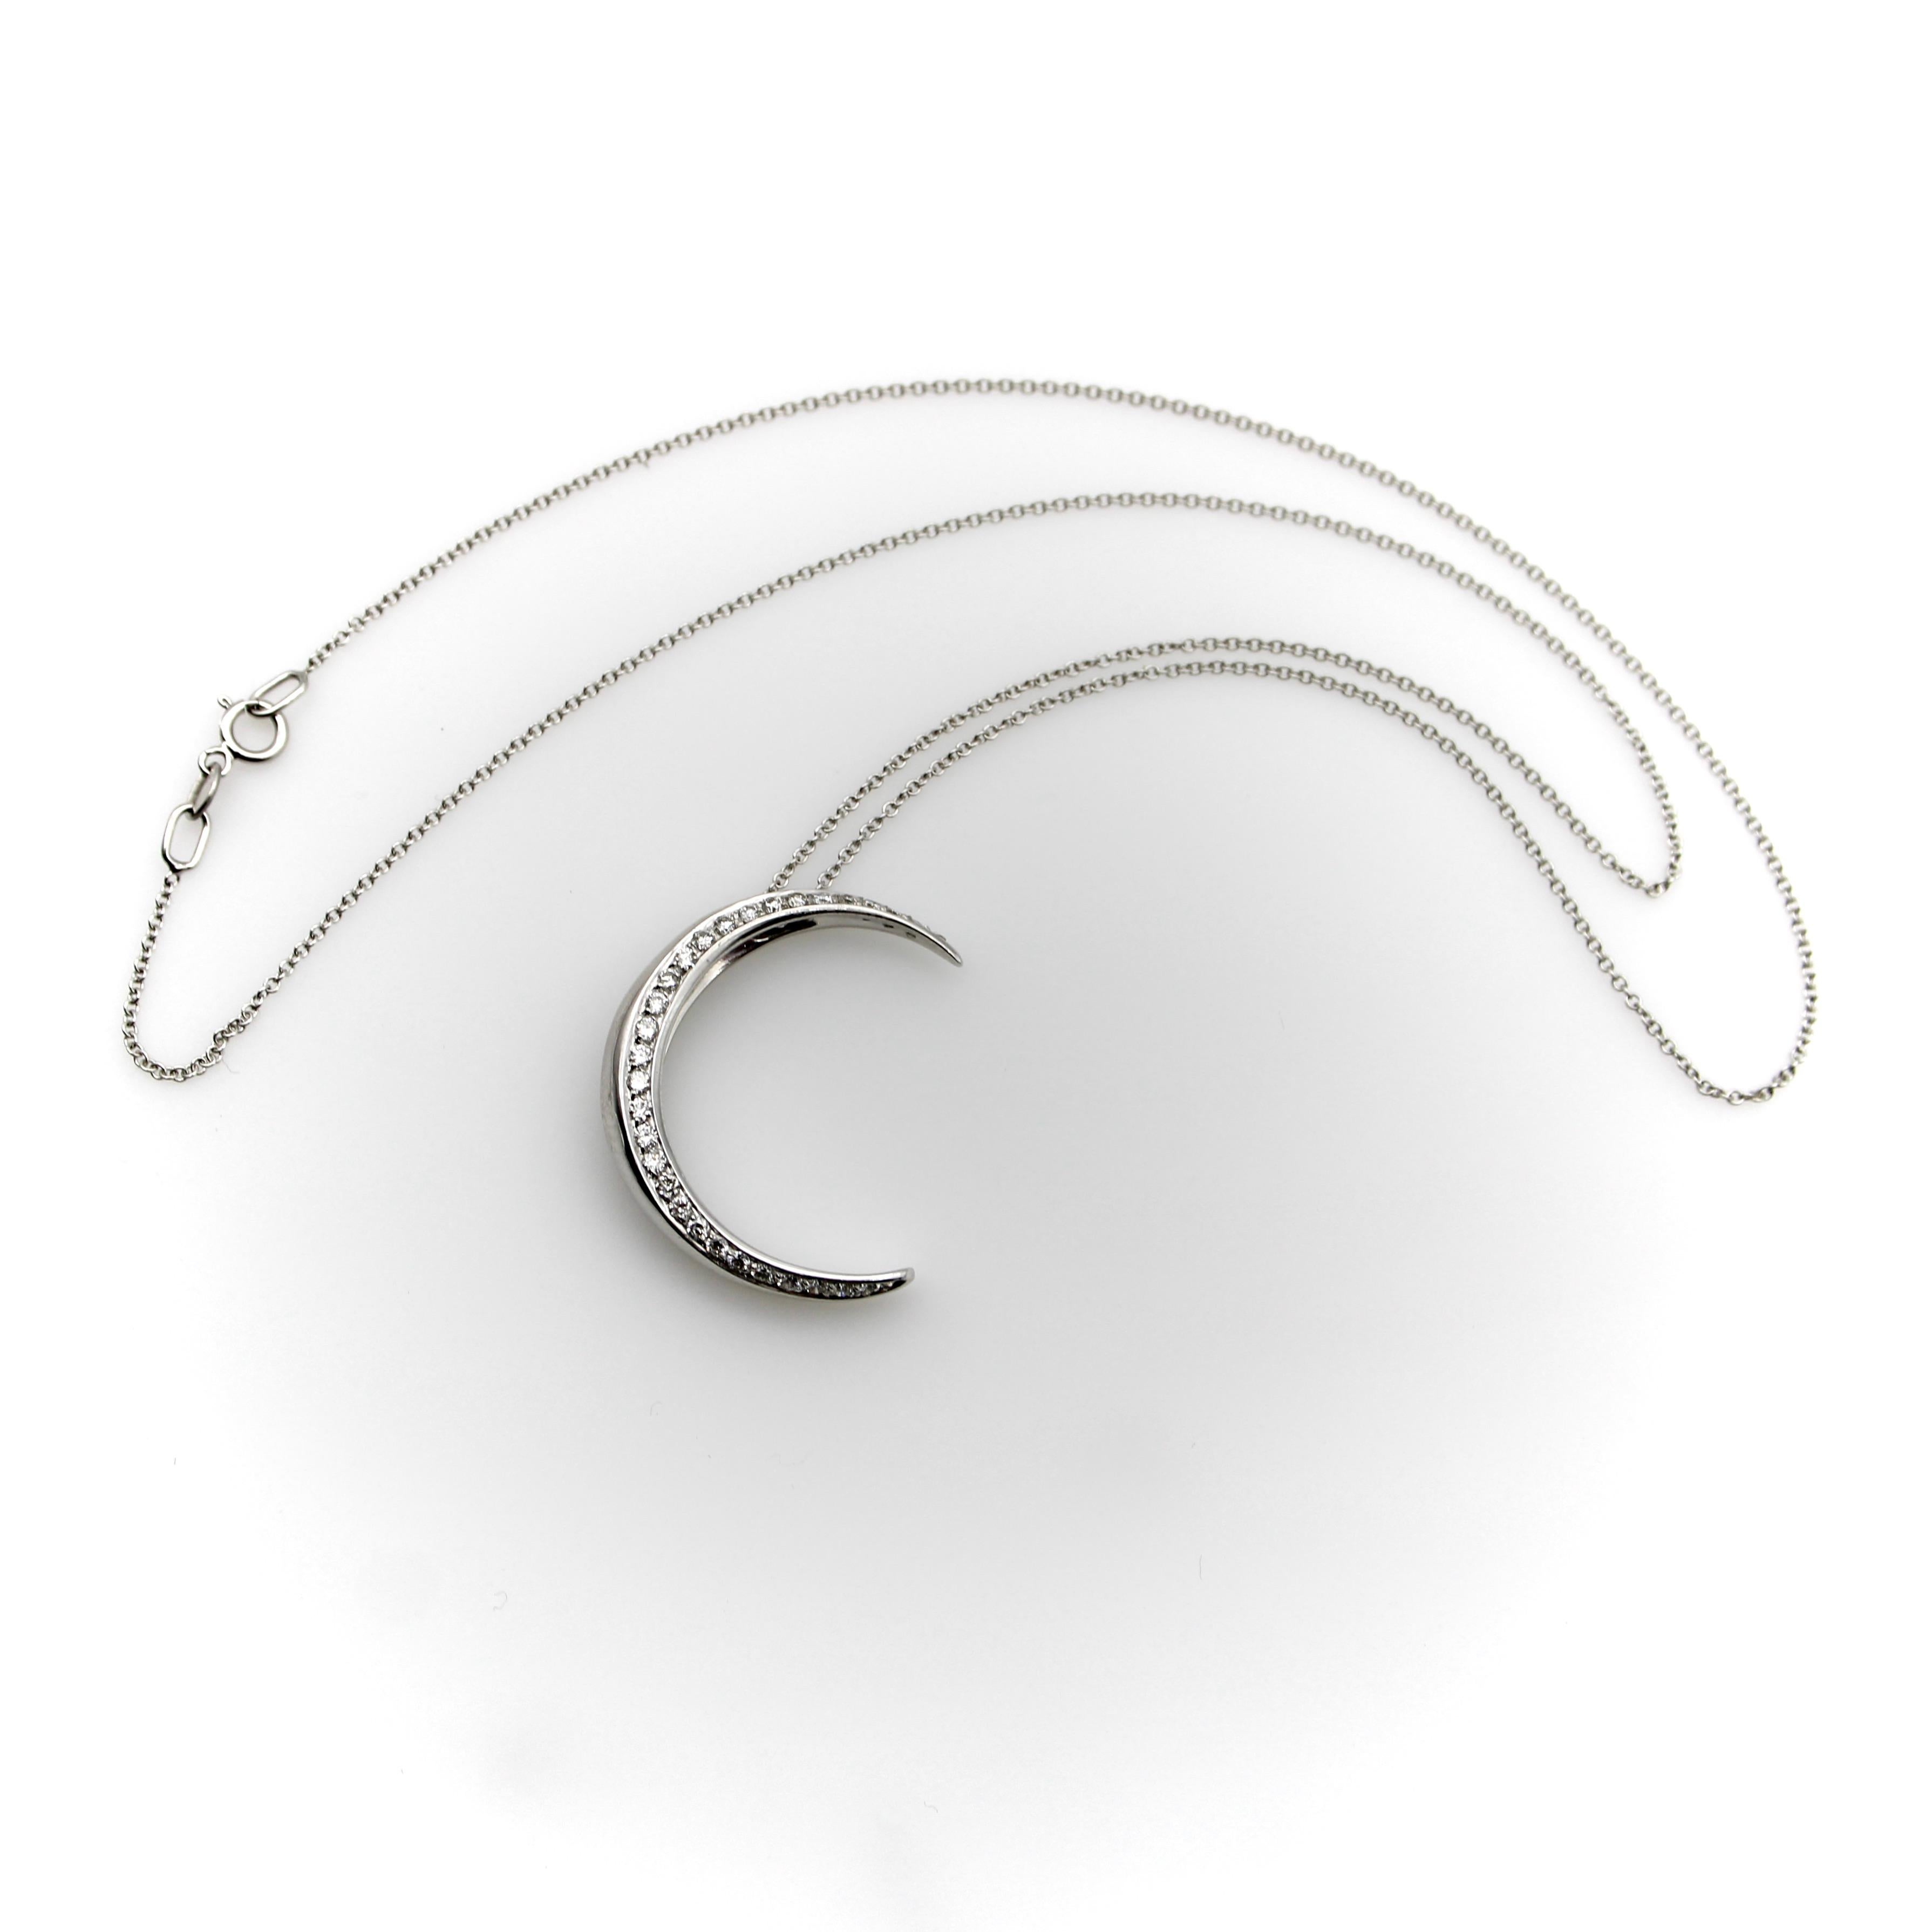 white gold moon necklace